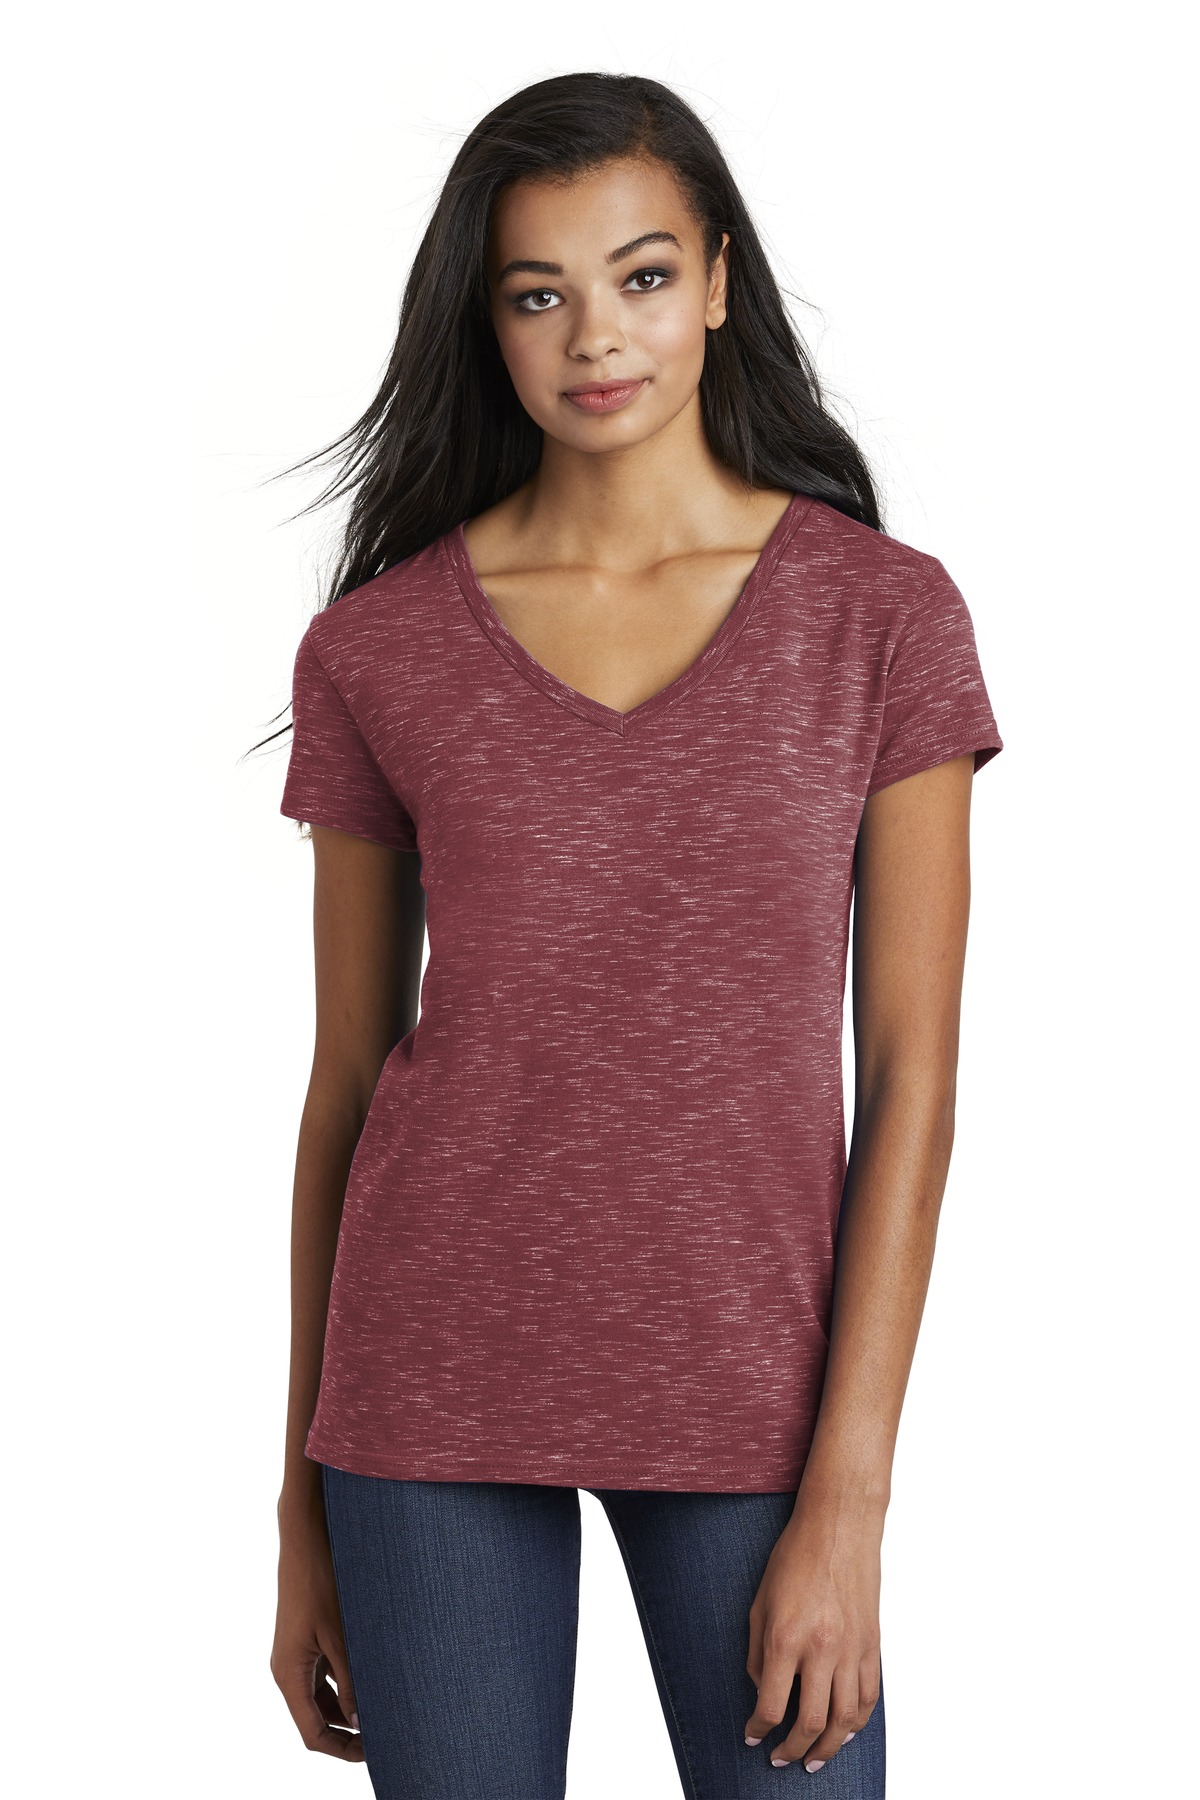 District Hospitality T-Shirts ® Womens Medal V-Neck Tee.-District